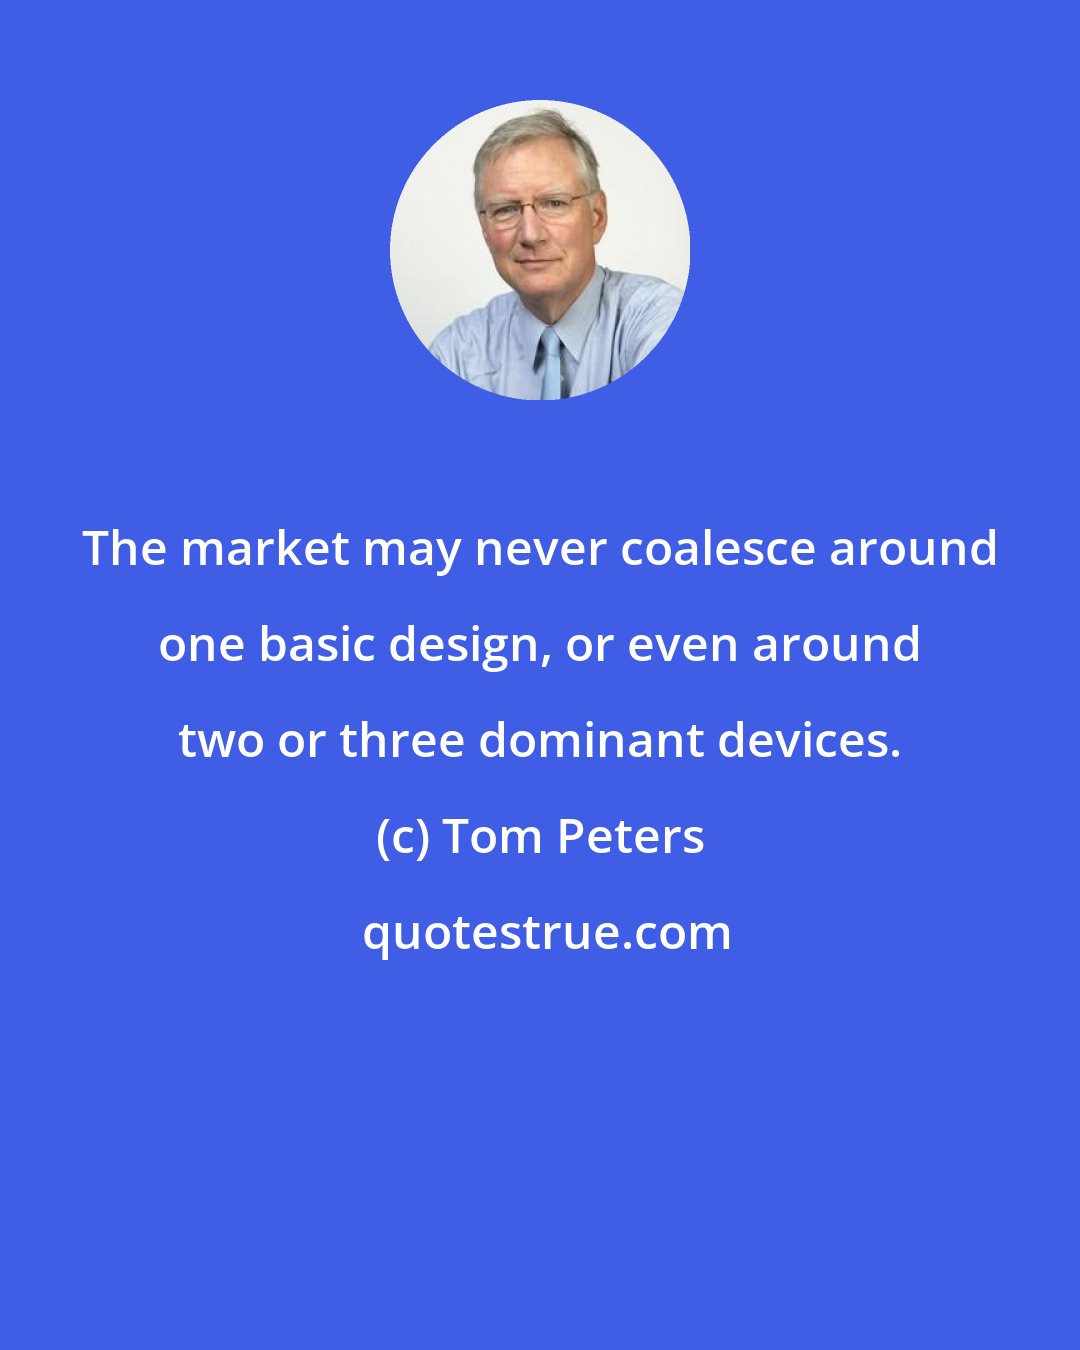 Tom Peters: The market may never coalesce around one basic design, or even around two or three dominant devices.